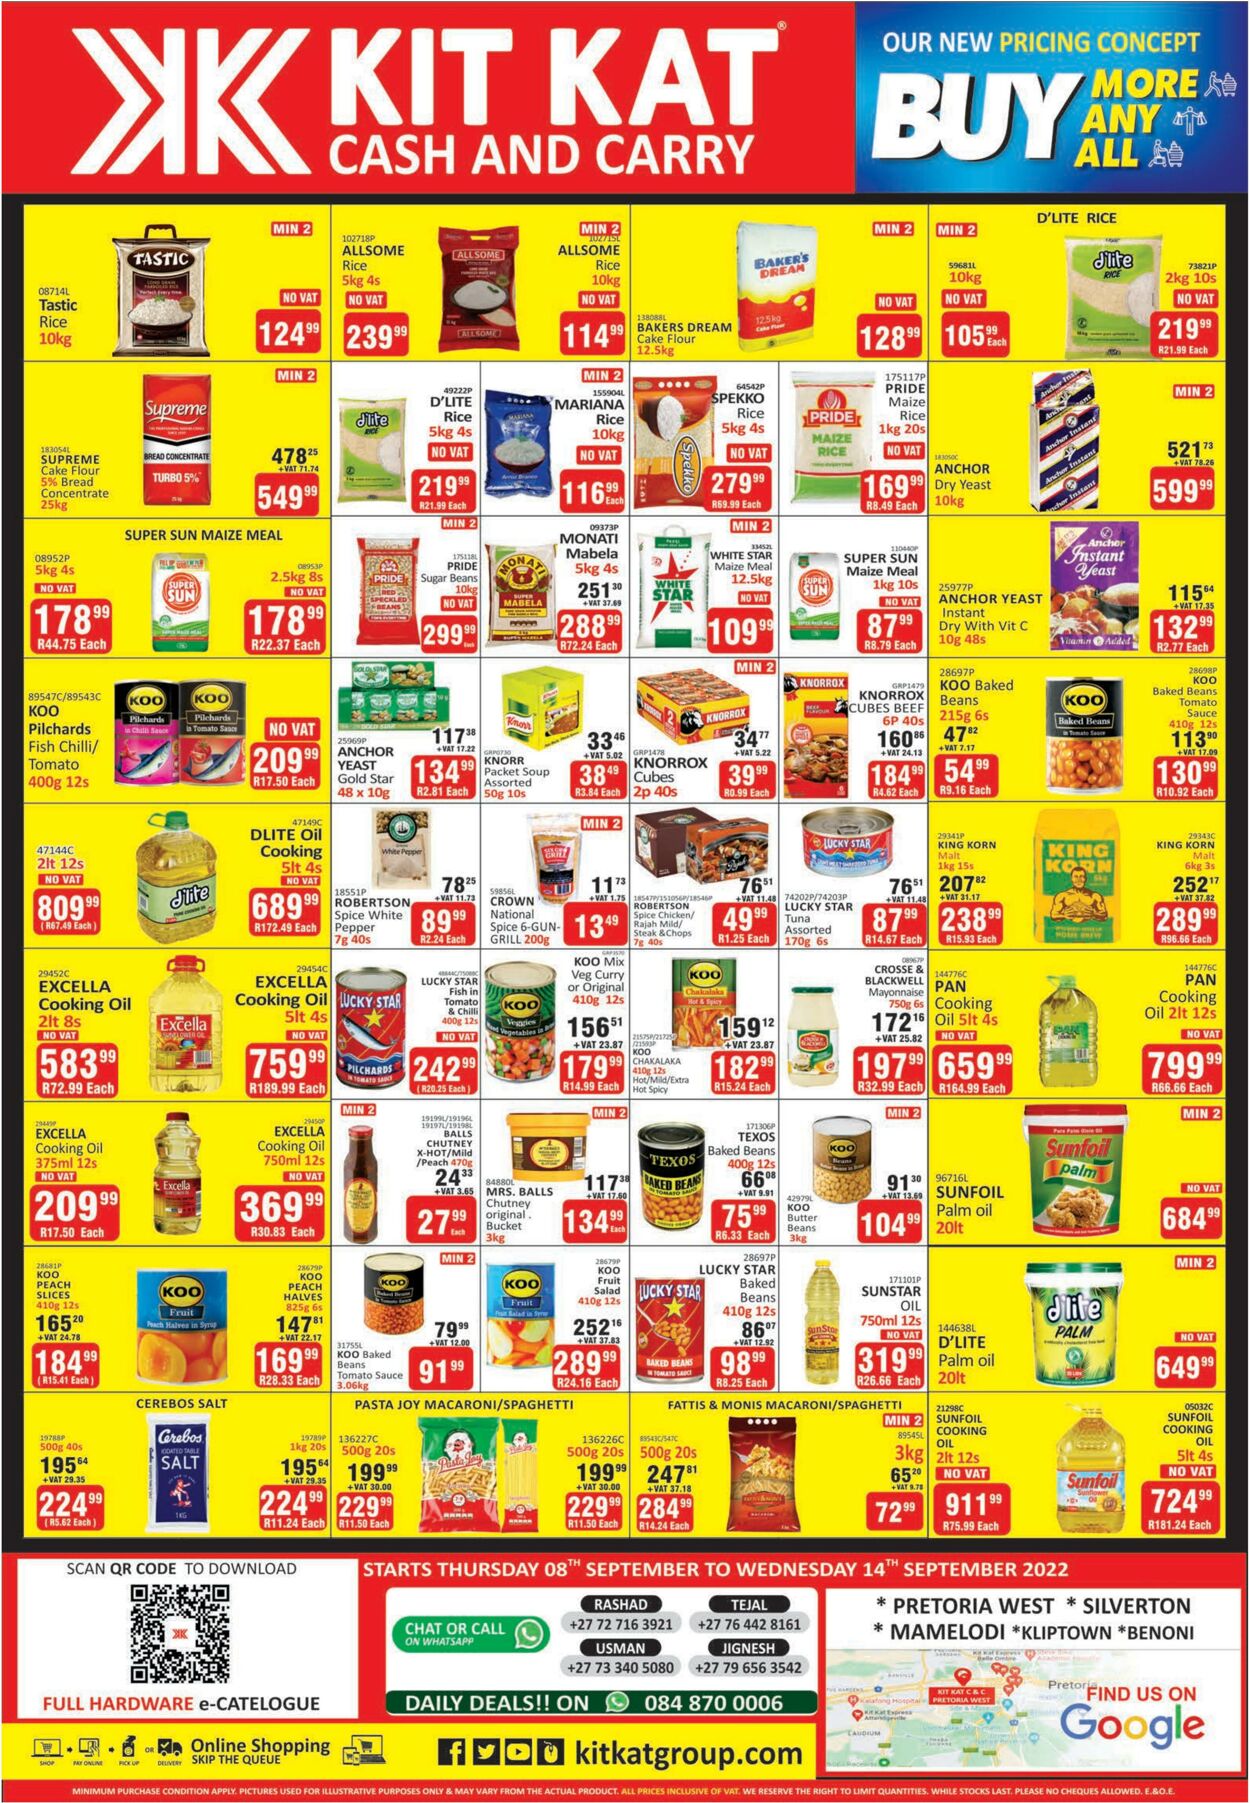 Special Kit Kat Cash and Carry 08.09.2022 - 14.09.2022